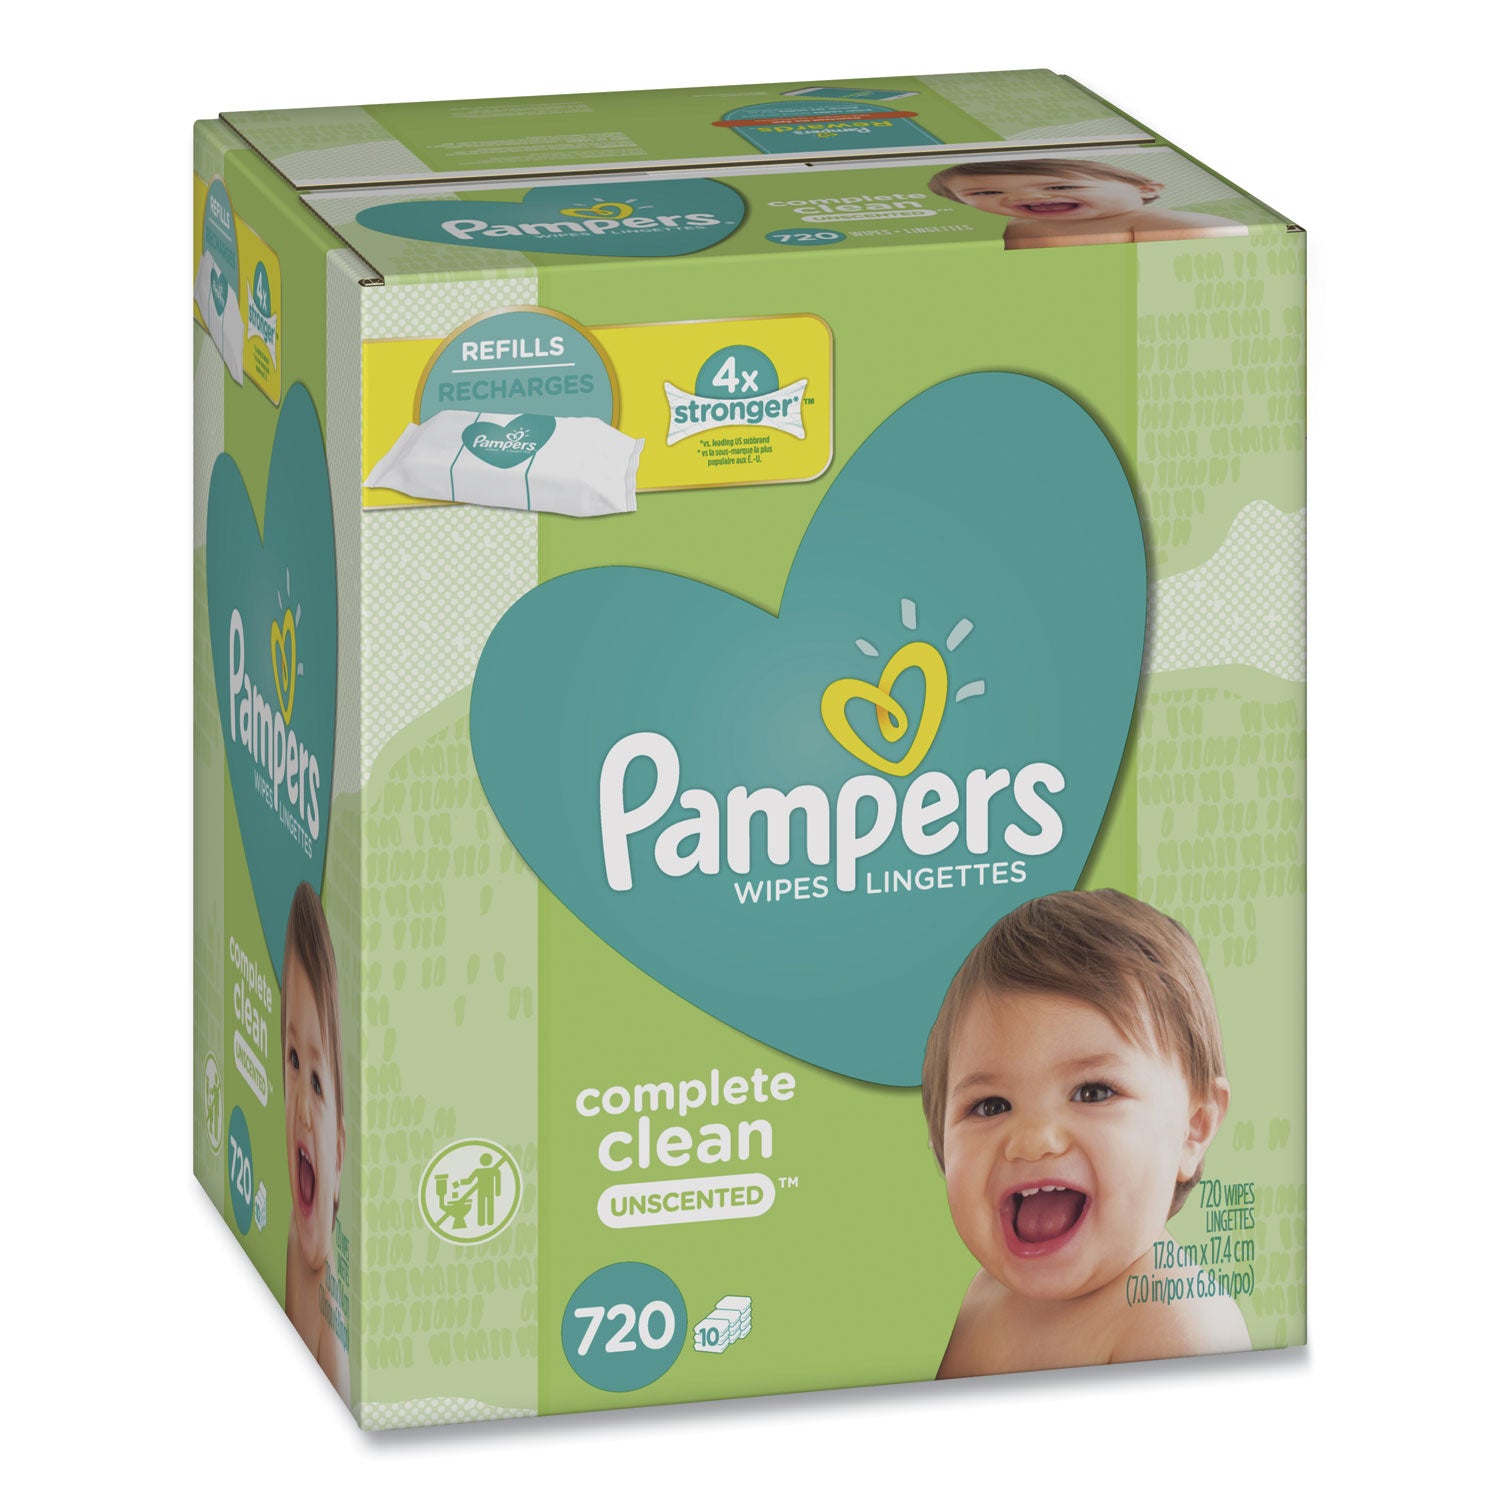 complete-clean-baby-wipes-1-ply-baby-fresh-7-x-68-white-80-wipes-pack-9-packs-carton_pgc75524 - 1